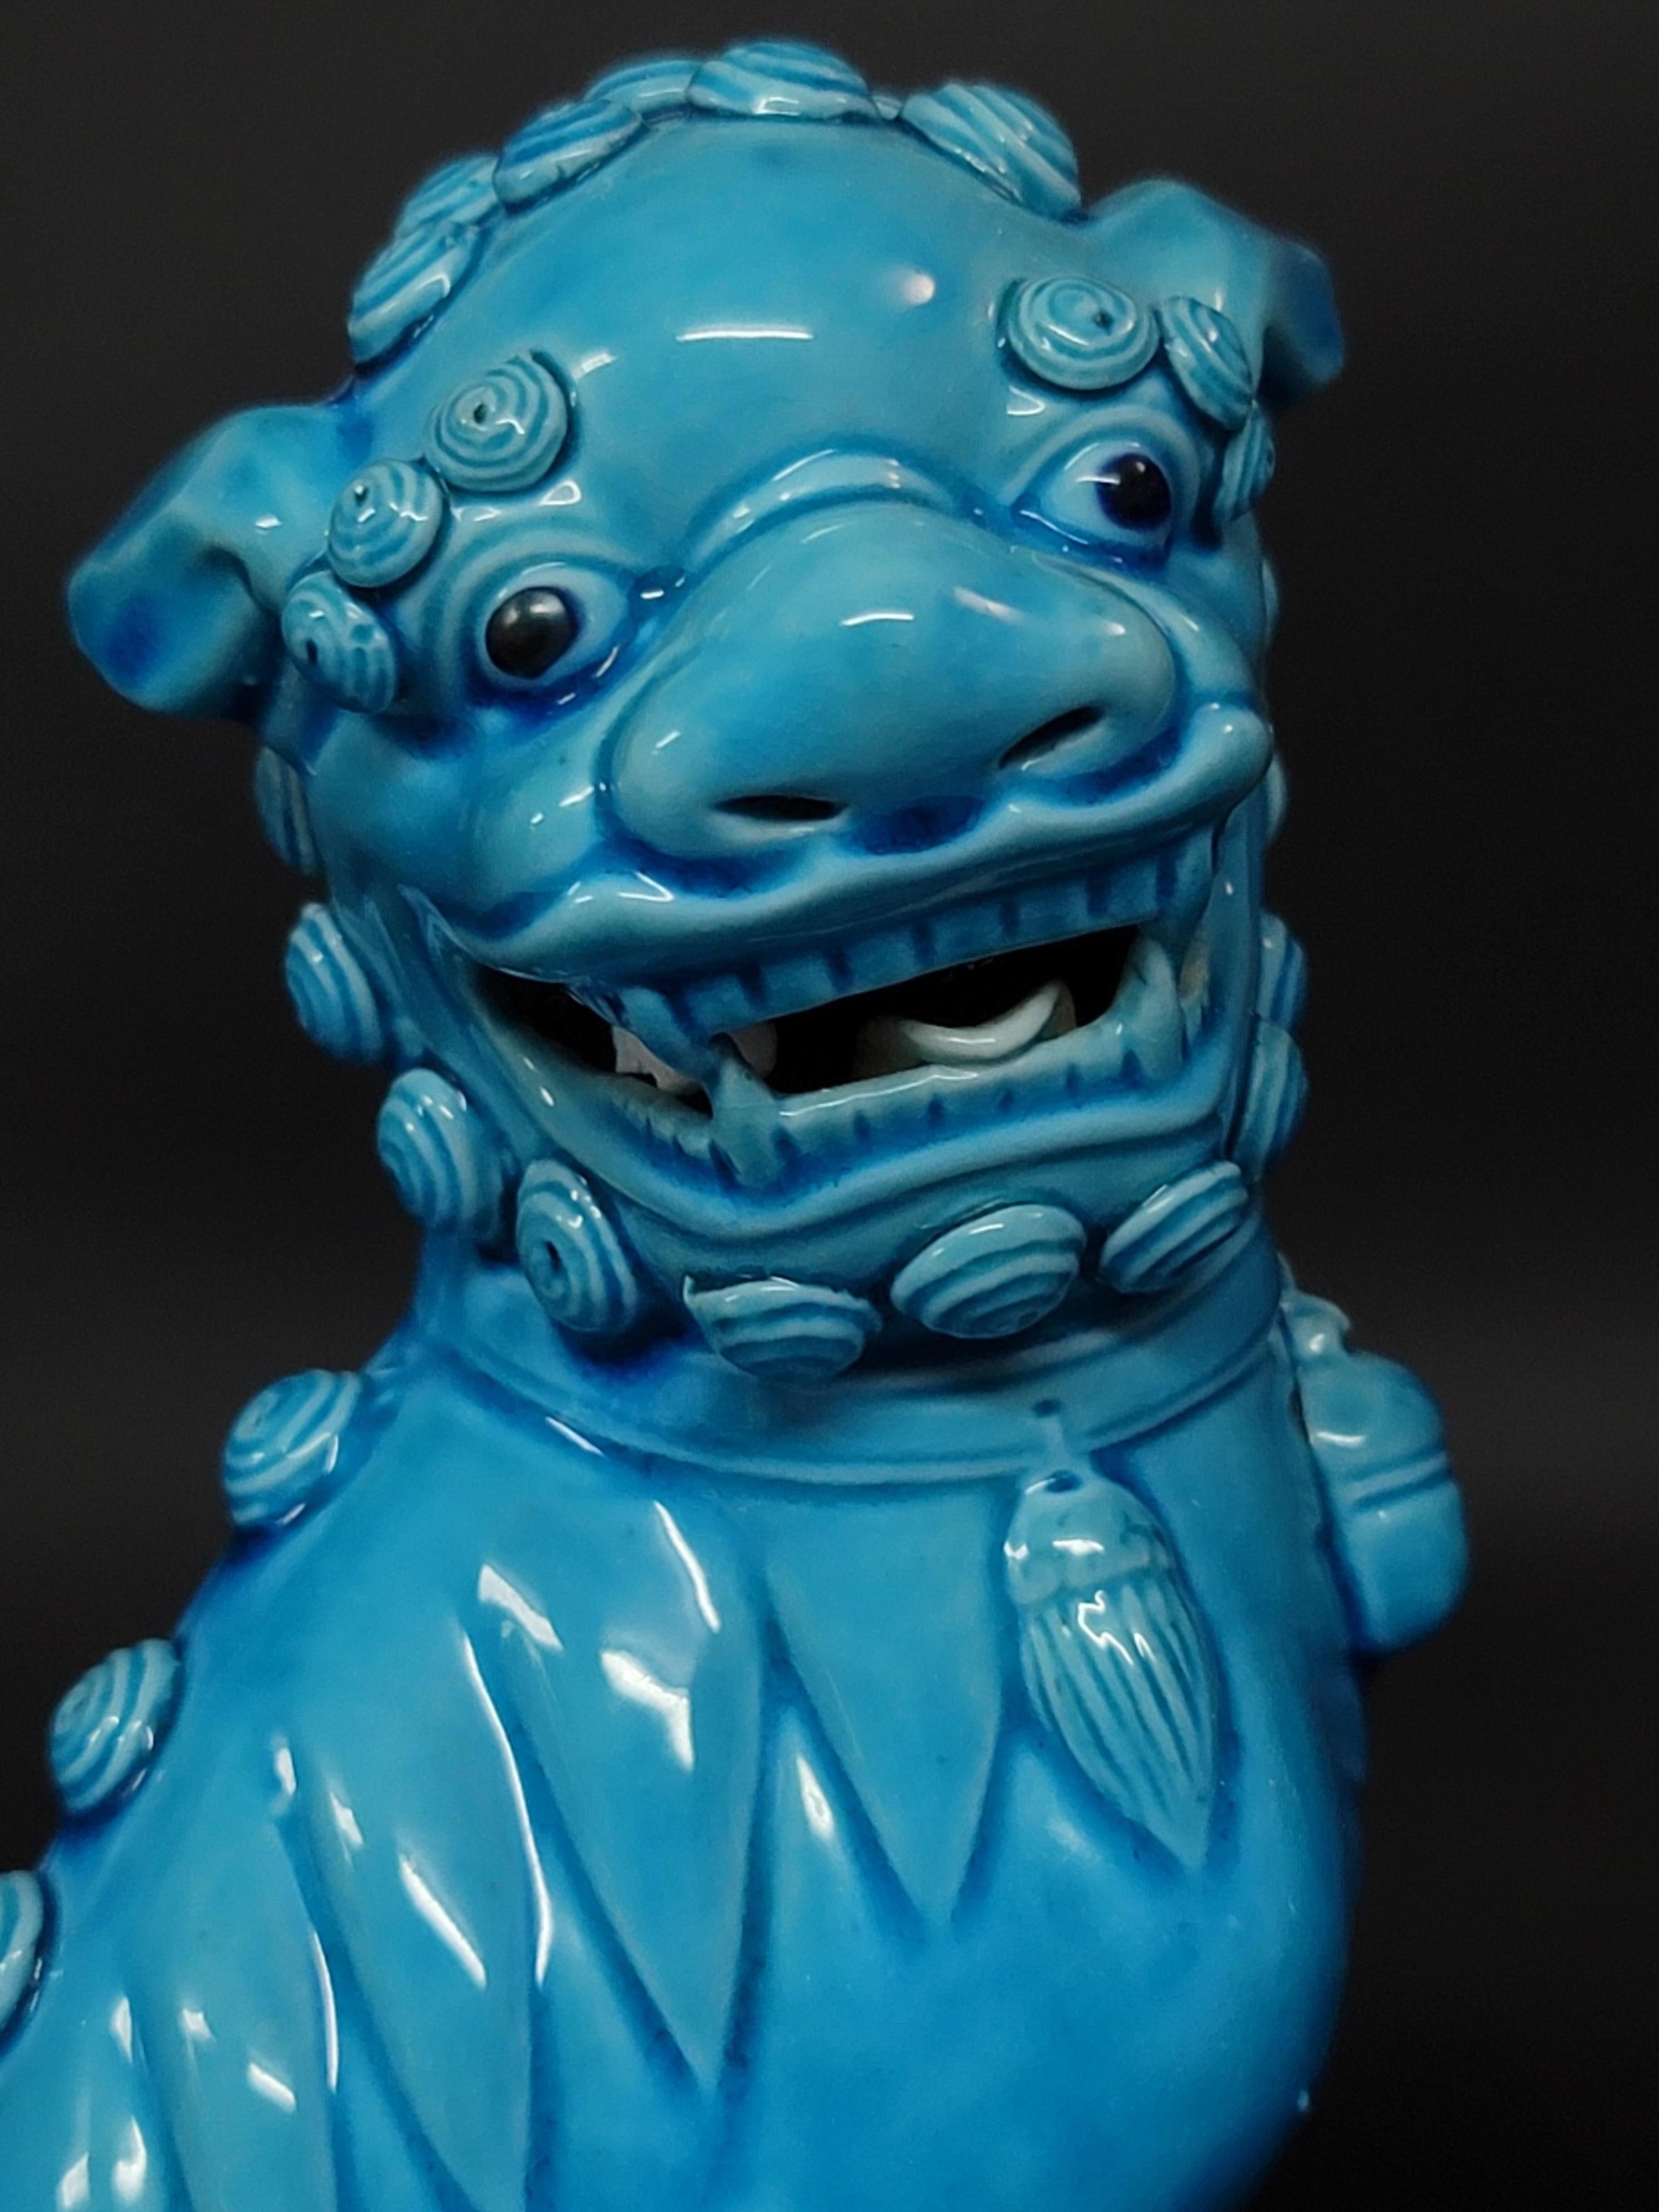 Fine and very detailed pair of Chinese turquoise glazed foo dogs from the mid 20th century. The hollow biscuit porcelain figures stand raised on a rectangular base and are looking sideways with open mouths and tongues showing teeth each with a